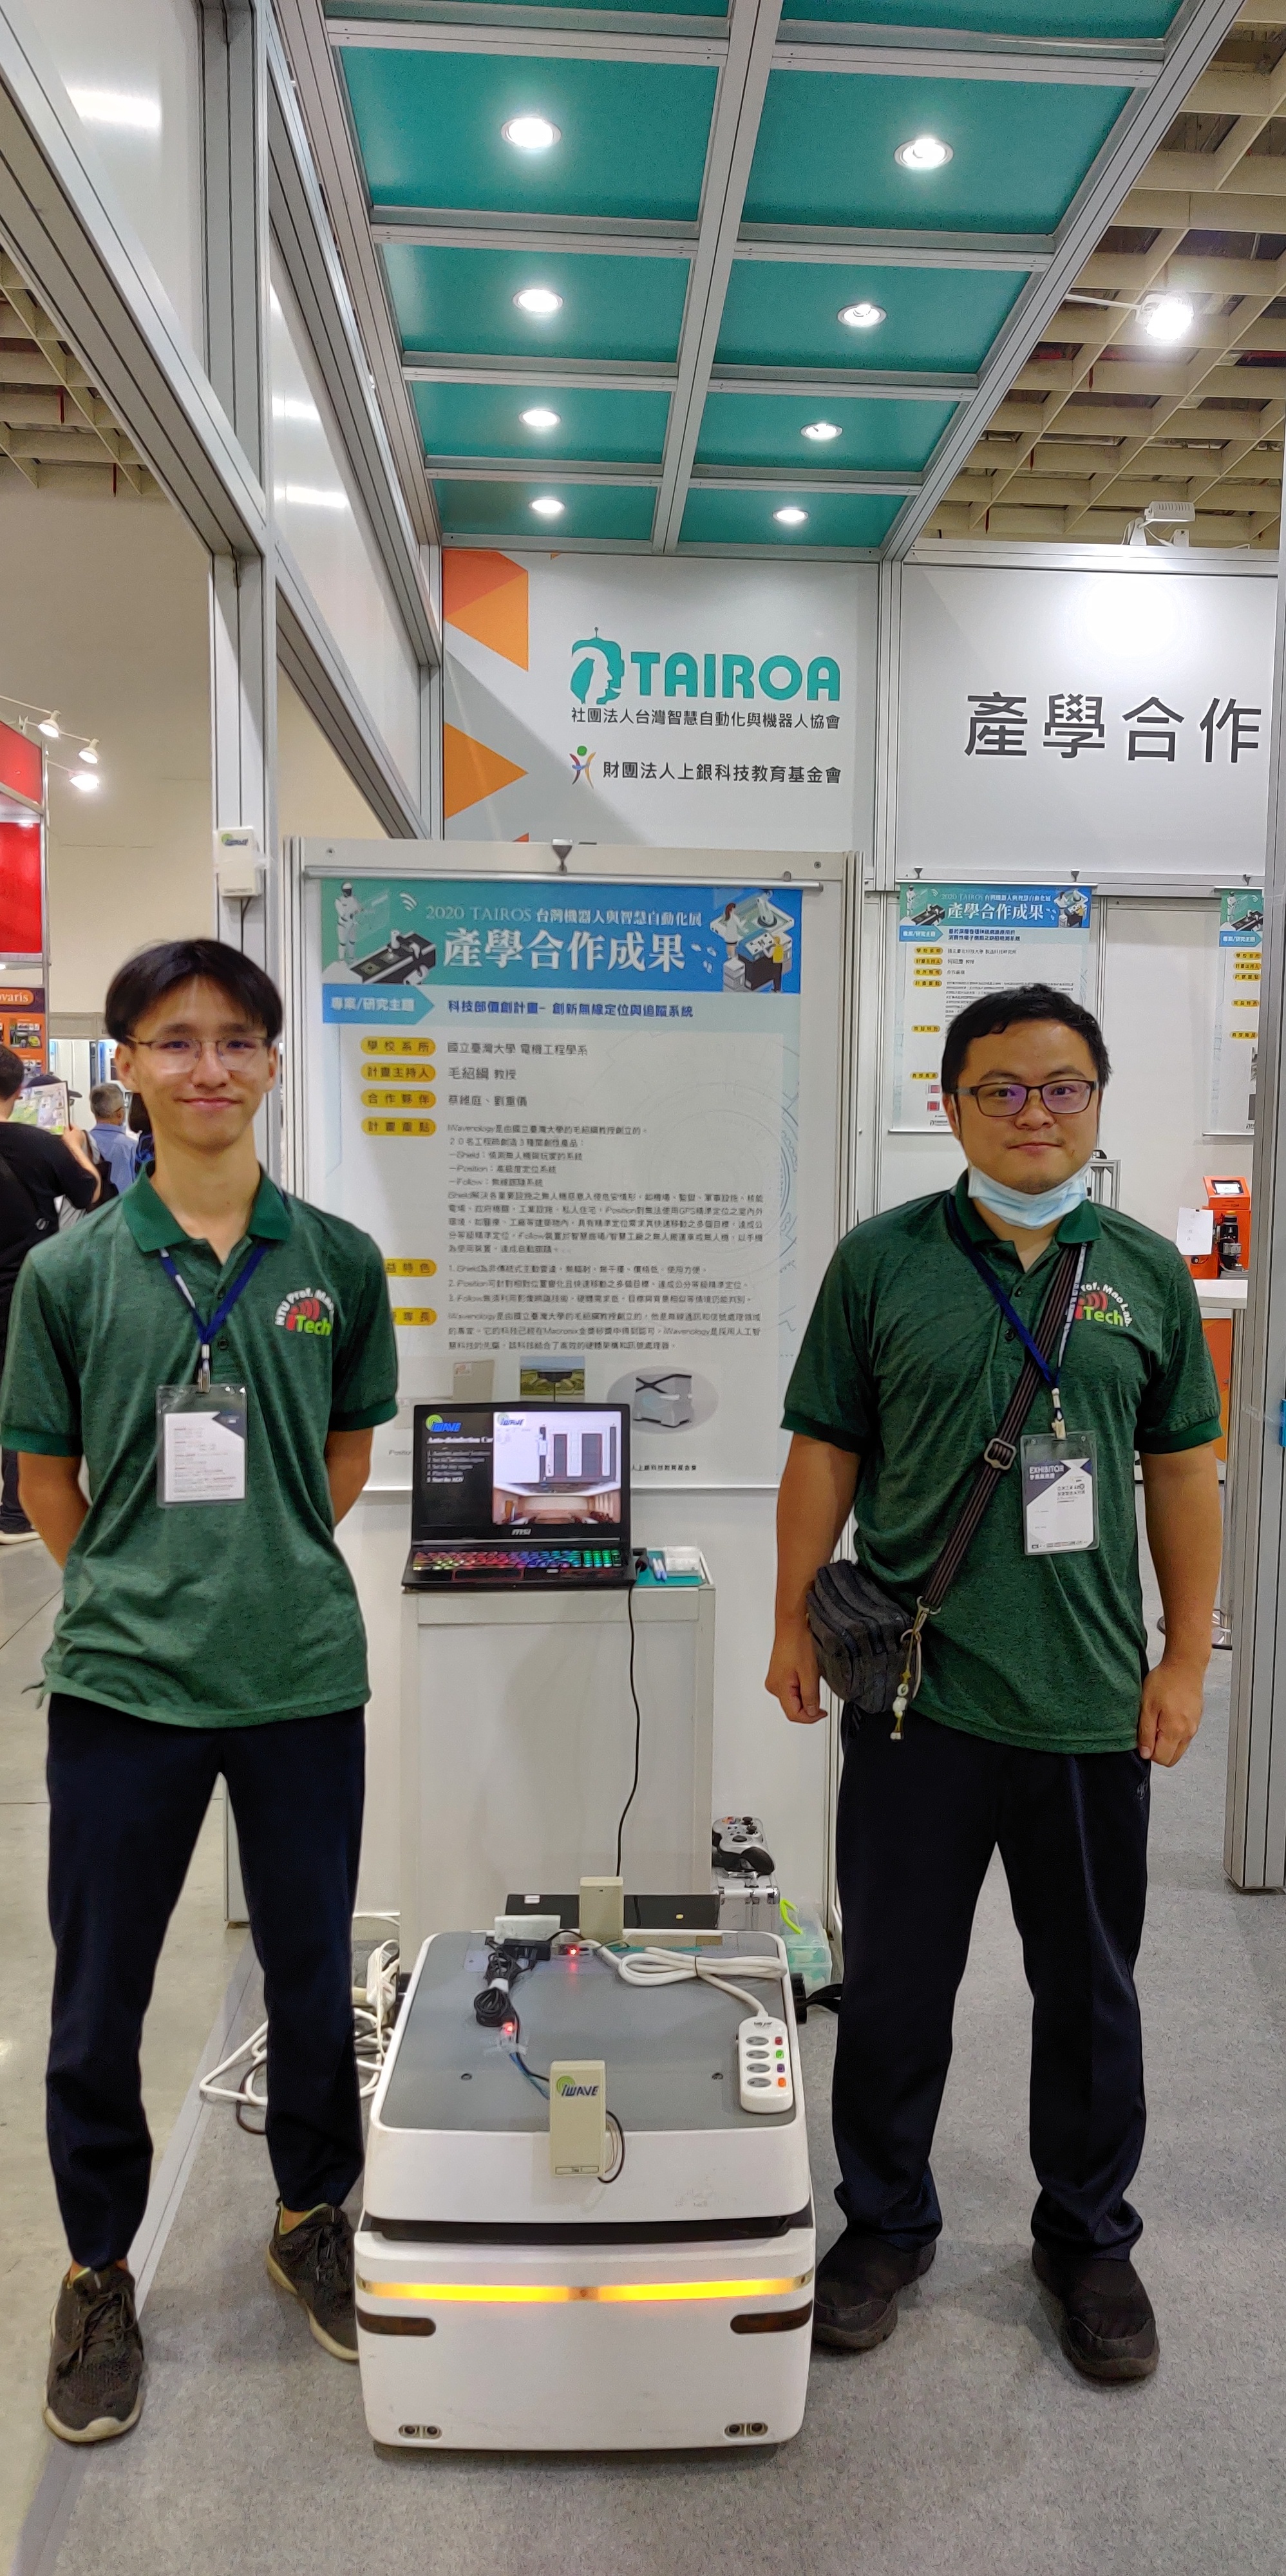 two men and an autonomous disinfection robot during an exhibition in Taipei